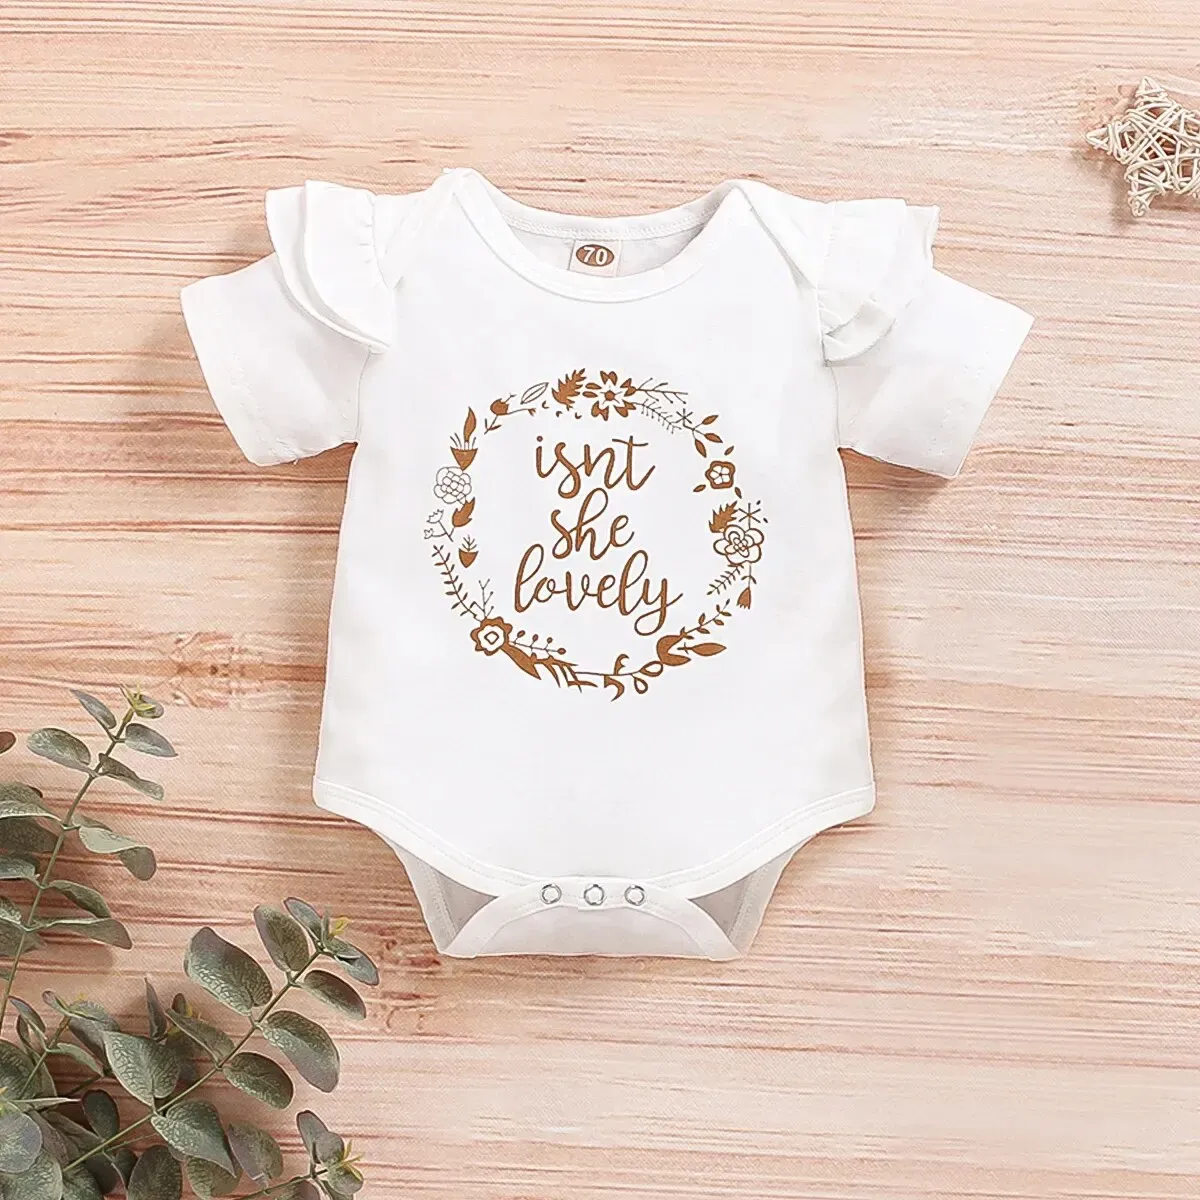 One-Pieces Newborn Baby Girl Romper White Short Sleeved Letter Printed Bodysuit Summer Jumpsuit Clothing for Toddler Girl 018 Months